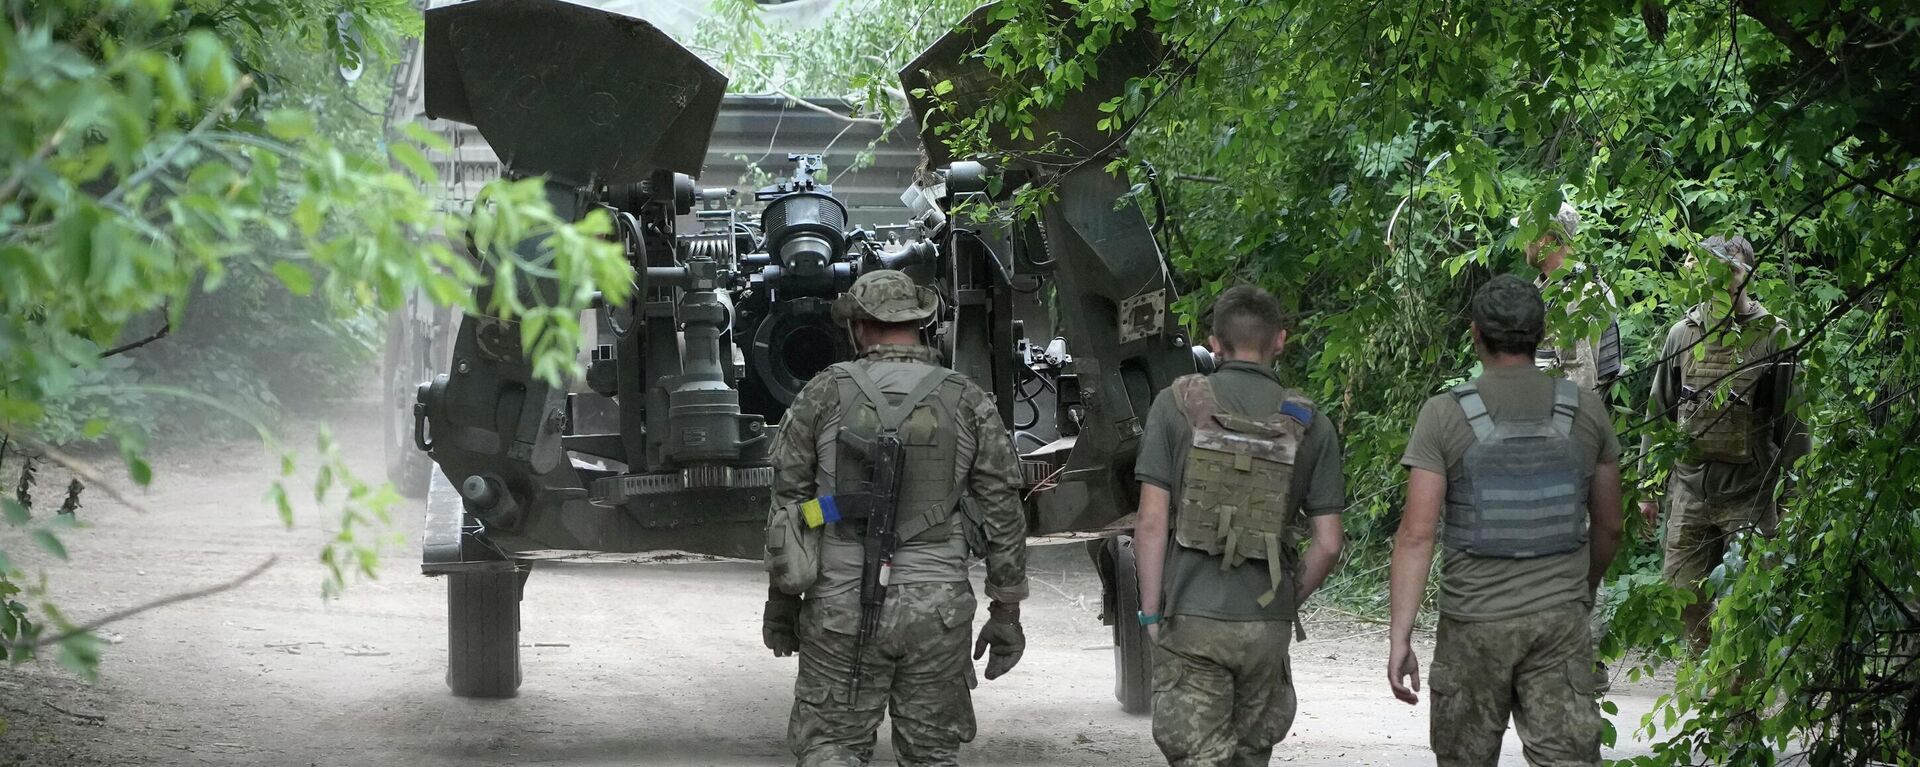 Ukrainian soldiers move a U.S.-supplied M777 howitzer into position to fire at Russian positions in Ukraine's eastern Donbas region Saturday, June 18, 2022 - Sputnik International, 1920, 11.04.2023